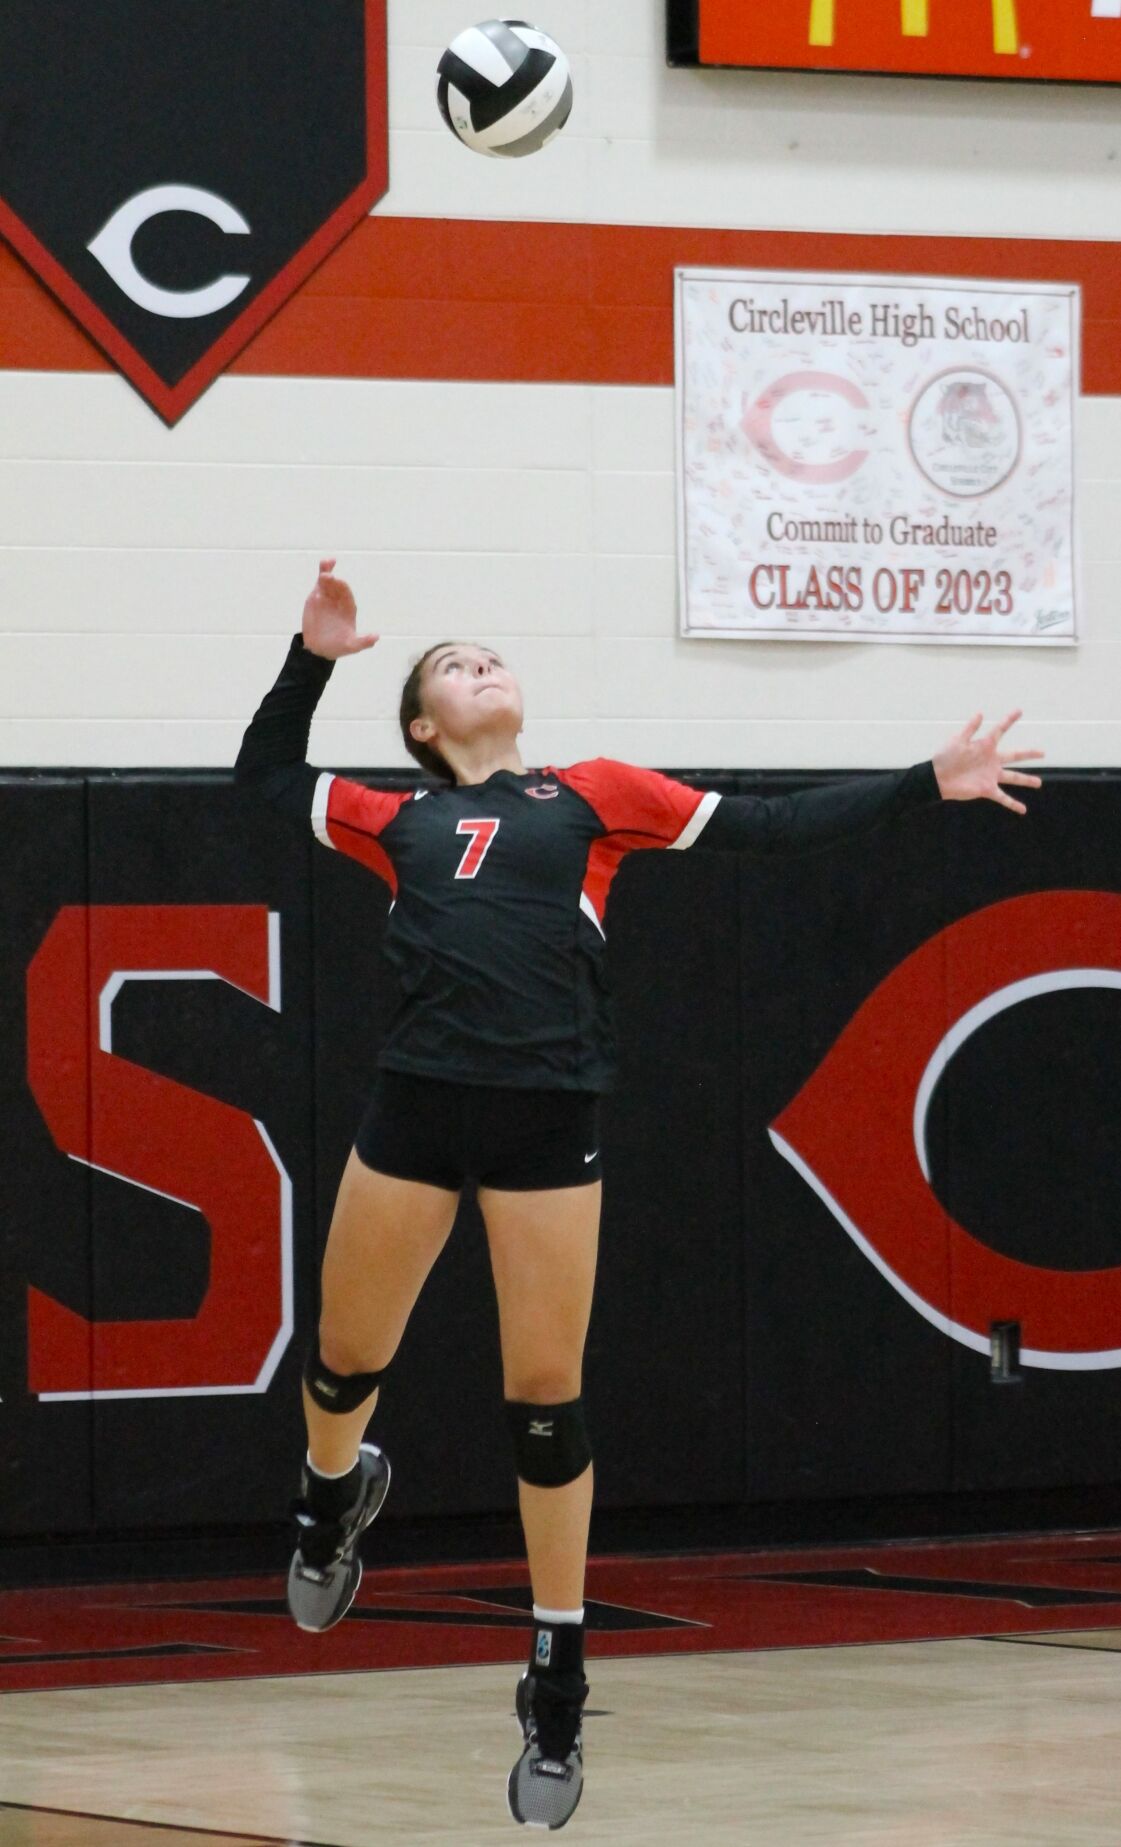 Circleville’s Lady Tigers Sweep Logan Elm’s Lady Braves in Rivalry Match